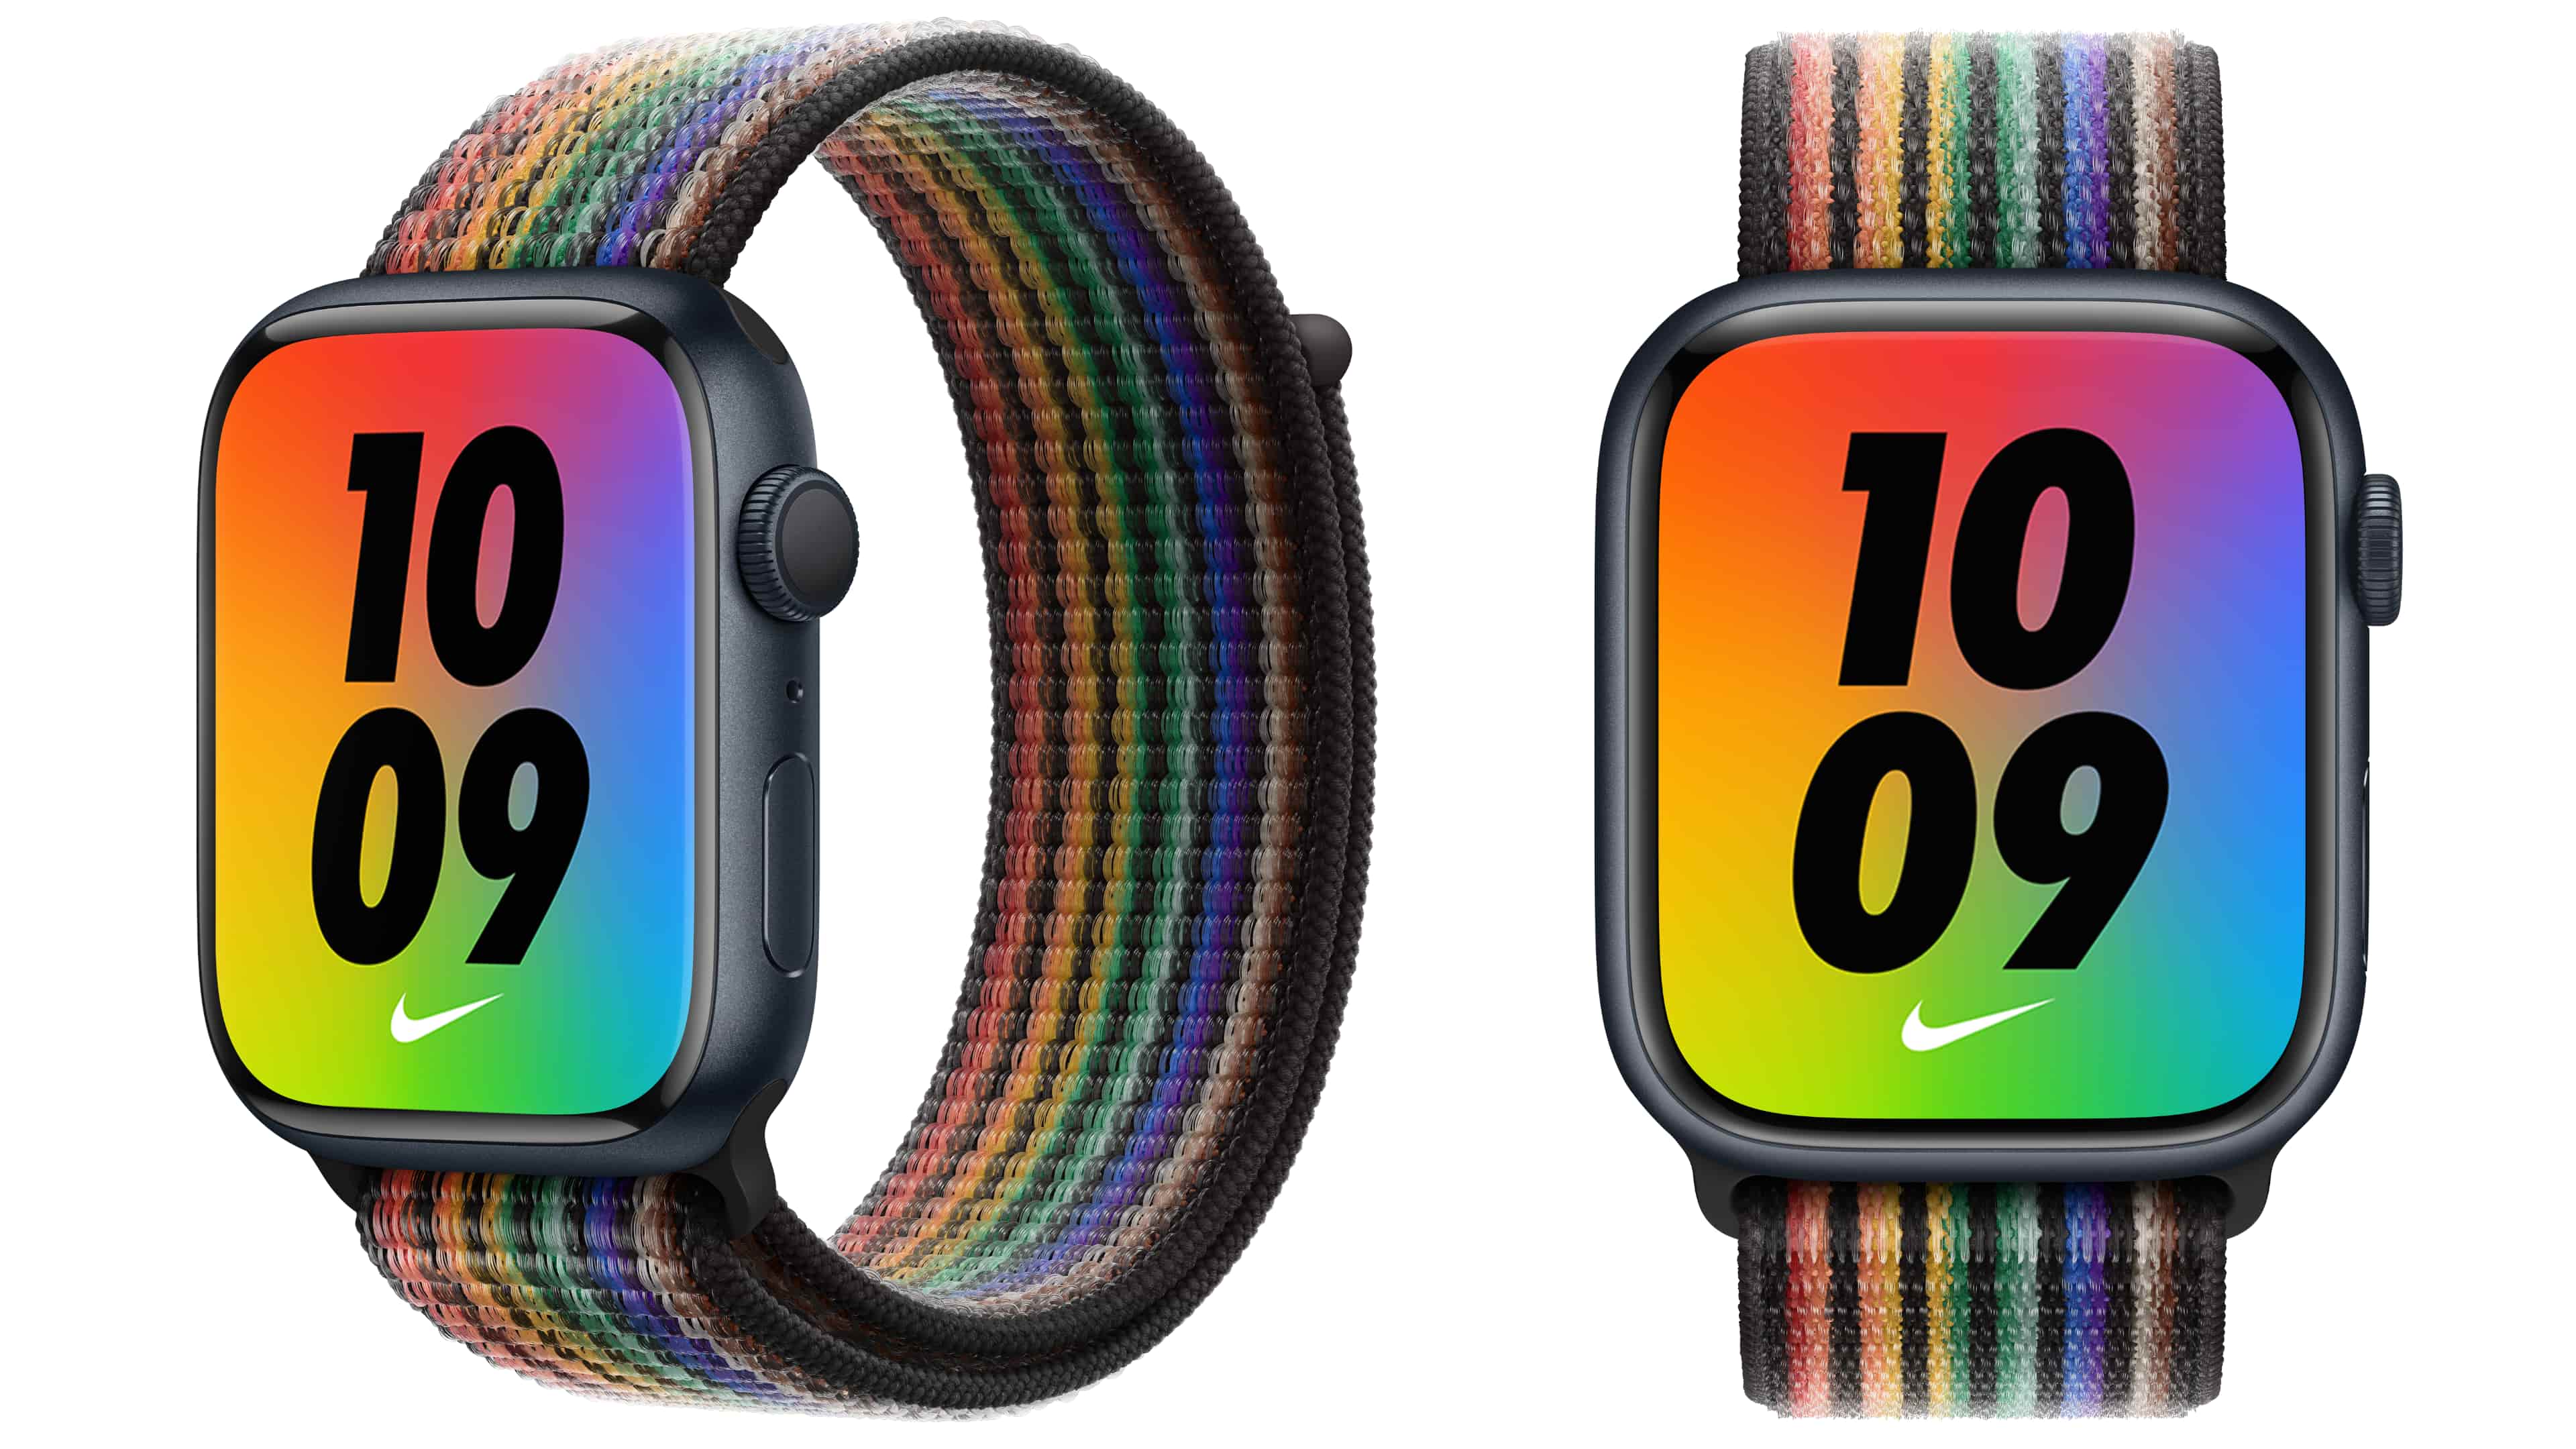 The rainbow-colored Nike Bounce face for your Apple Watch accompanies the Pride Edition Nike Sport Loop band release in support of the LGBTQ+ community.